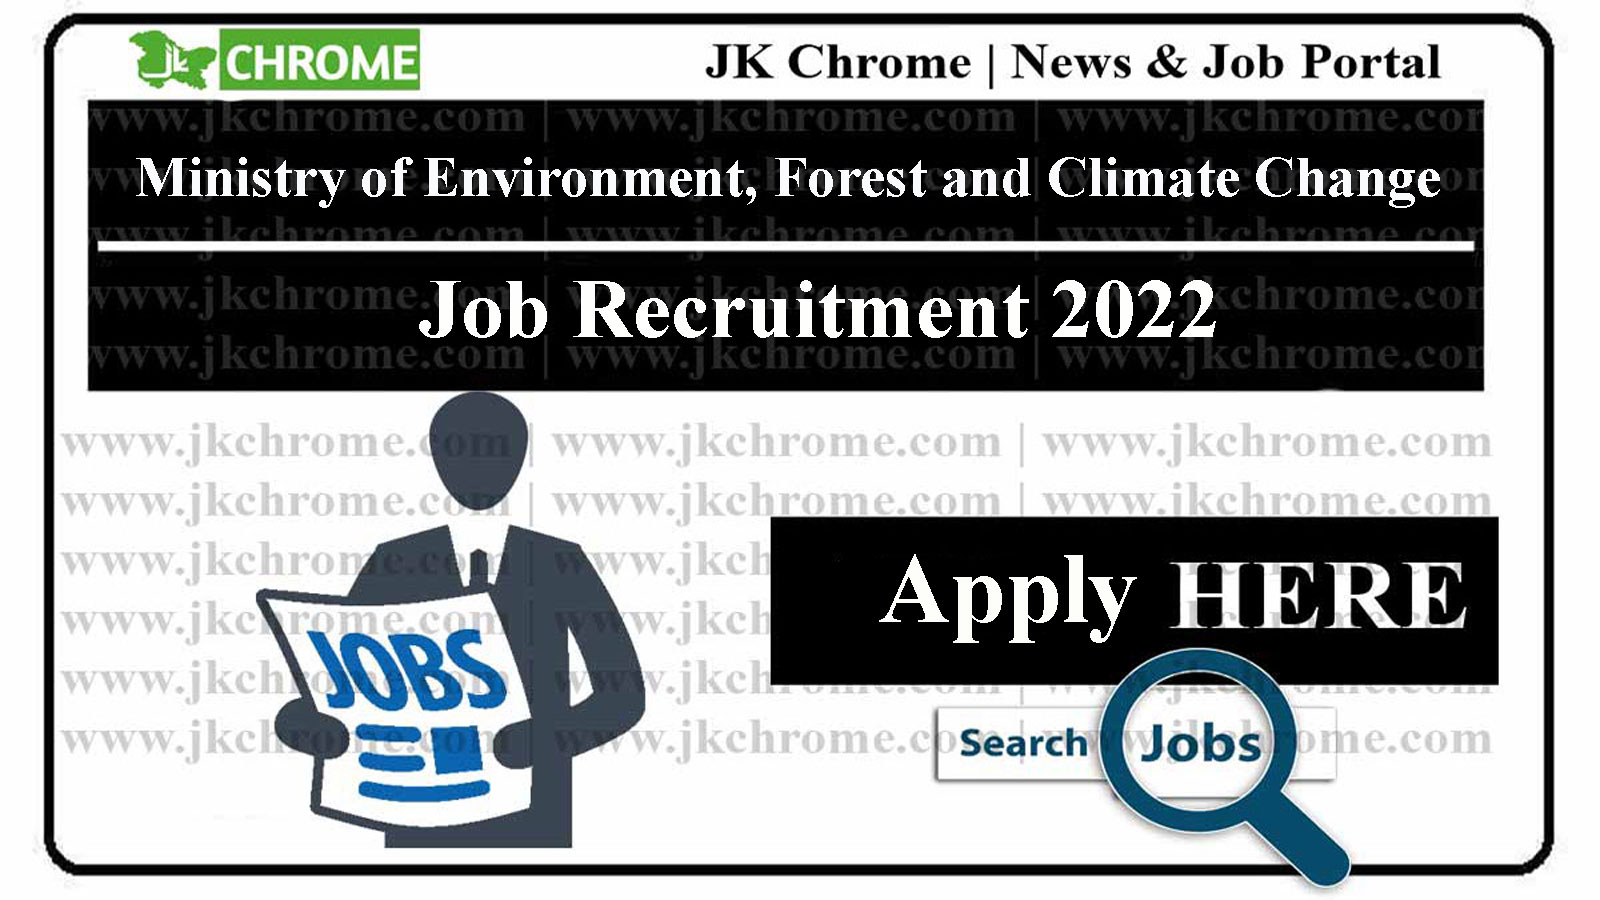 Ministry of Environment, Forest and Climate Change Recruitment 2022